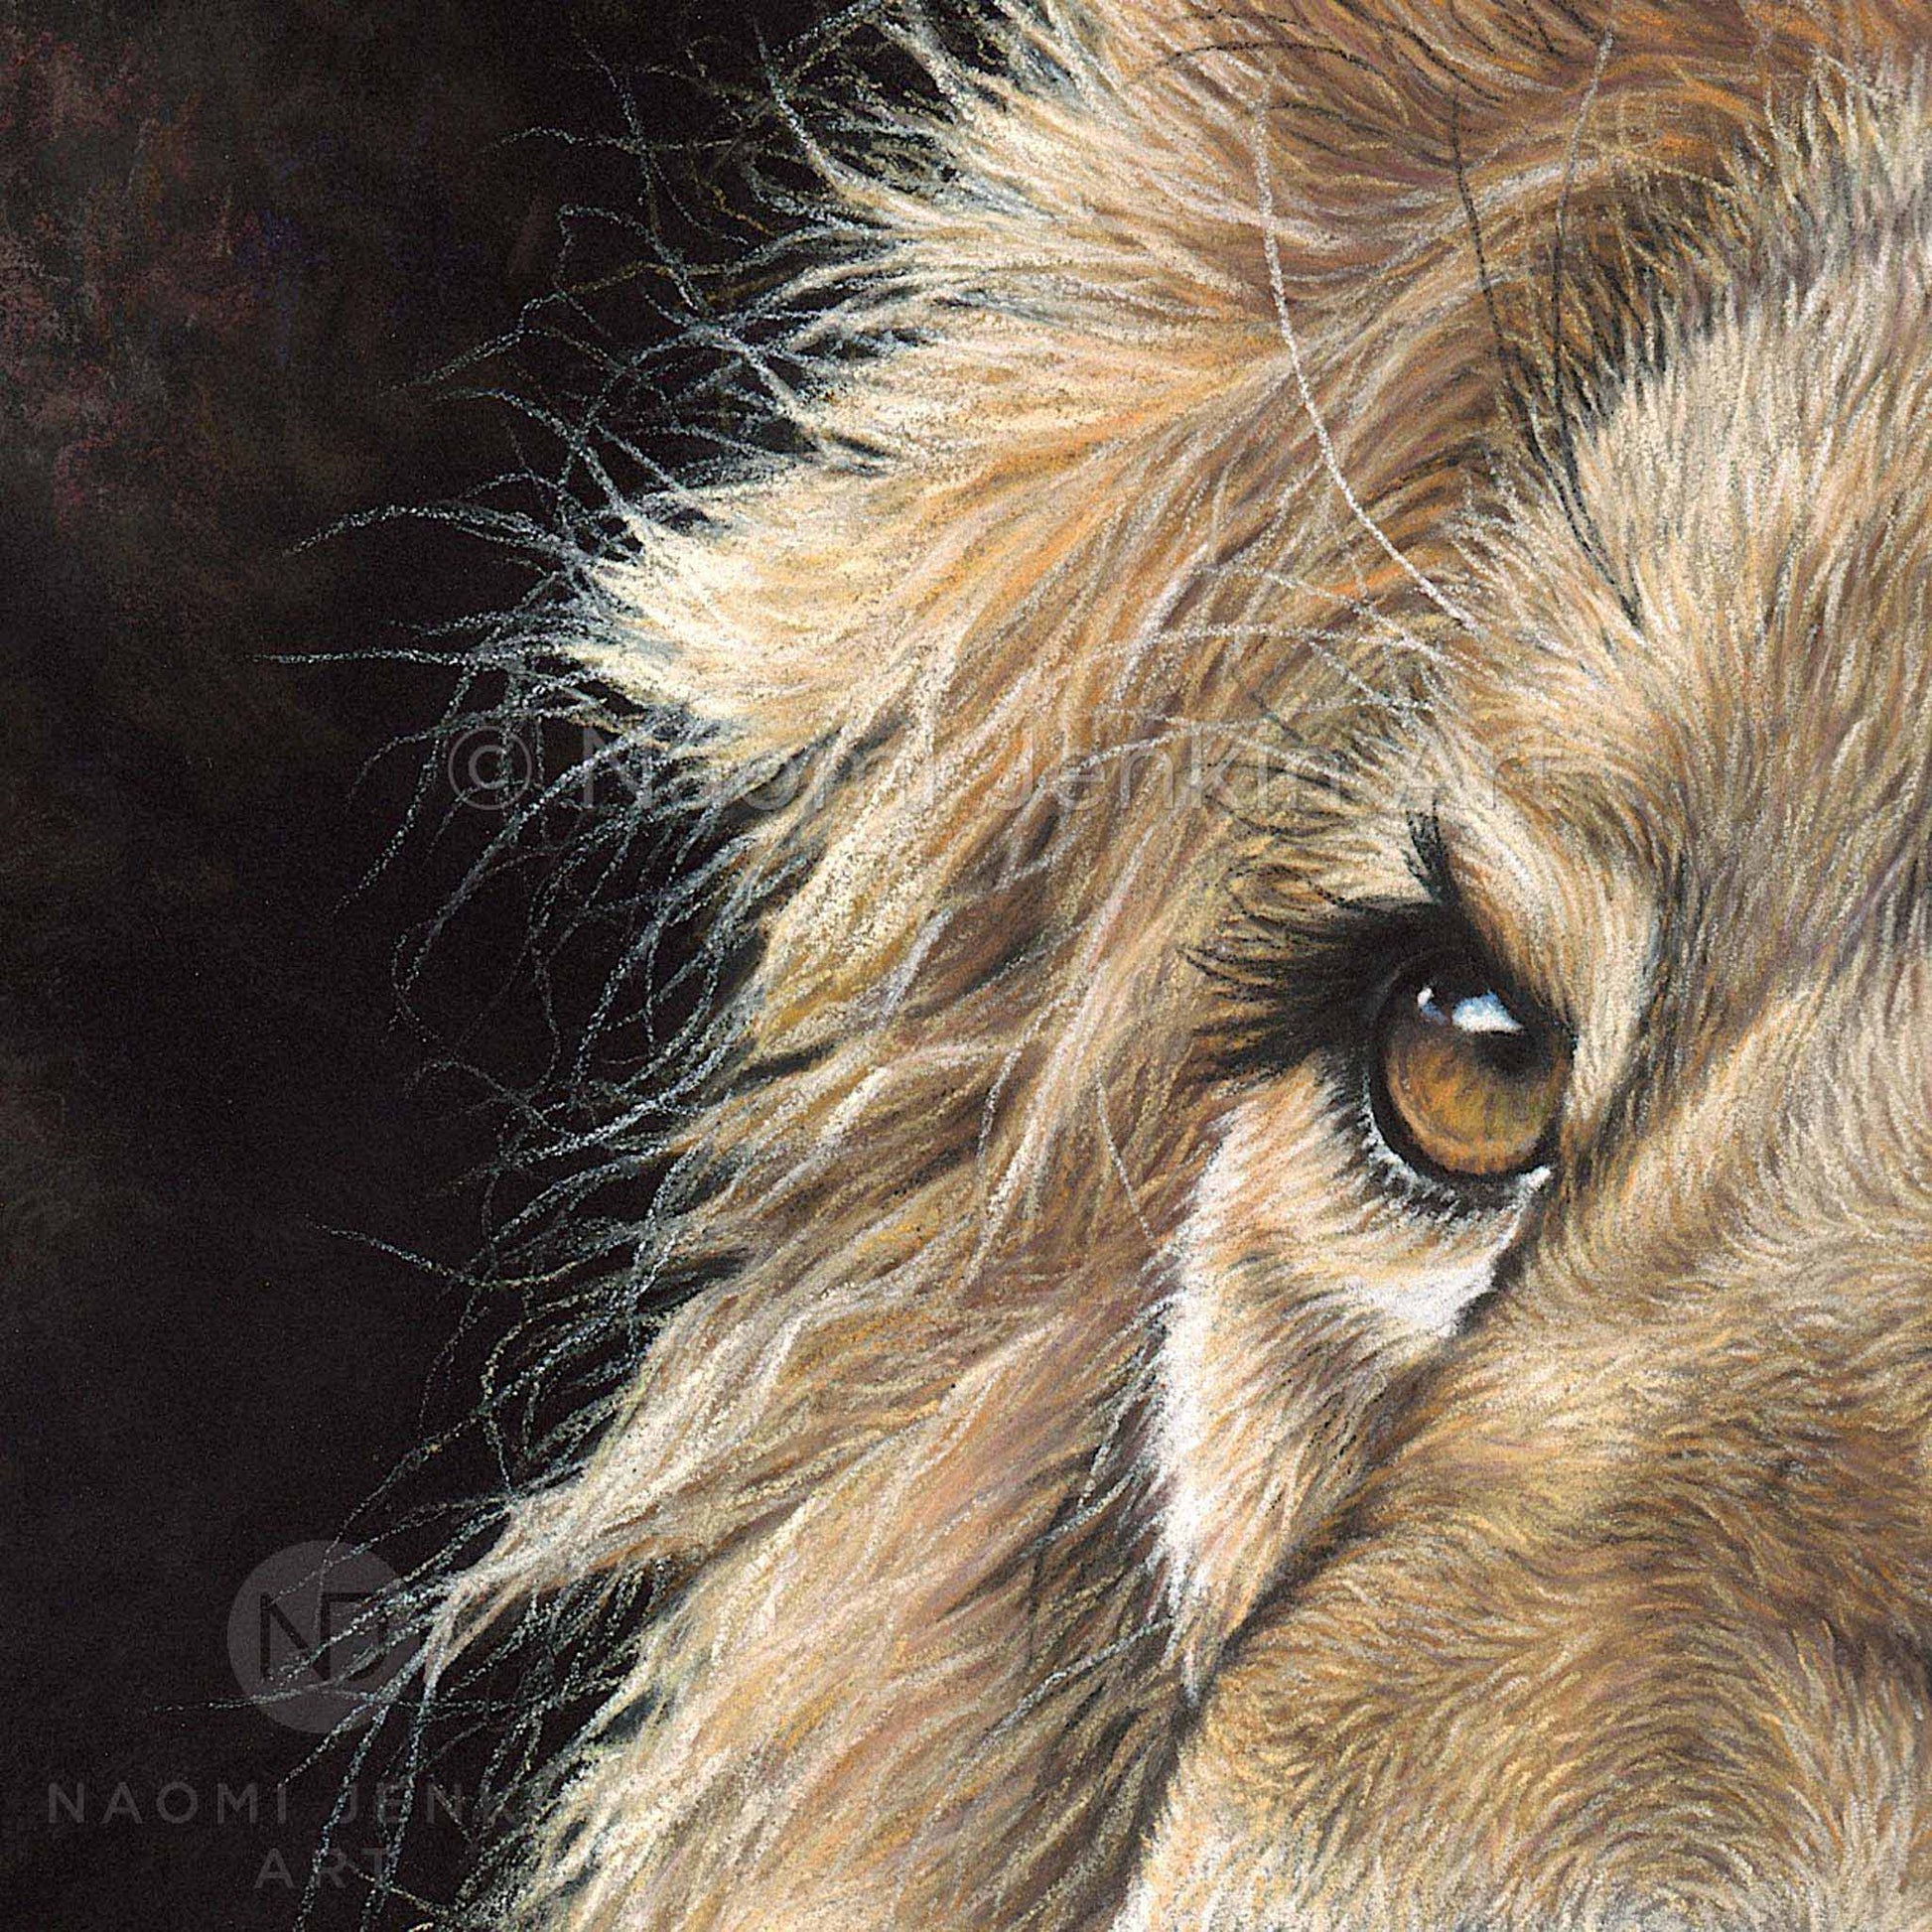 Close up detail of a lion's face and mane from the 'Watchful Eyes' lion painting by Naomi Jenkin